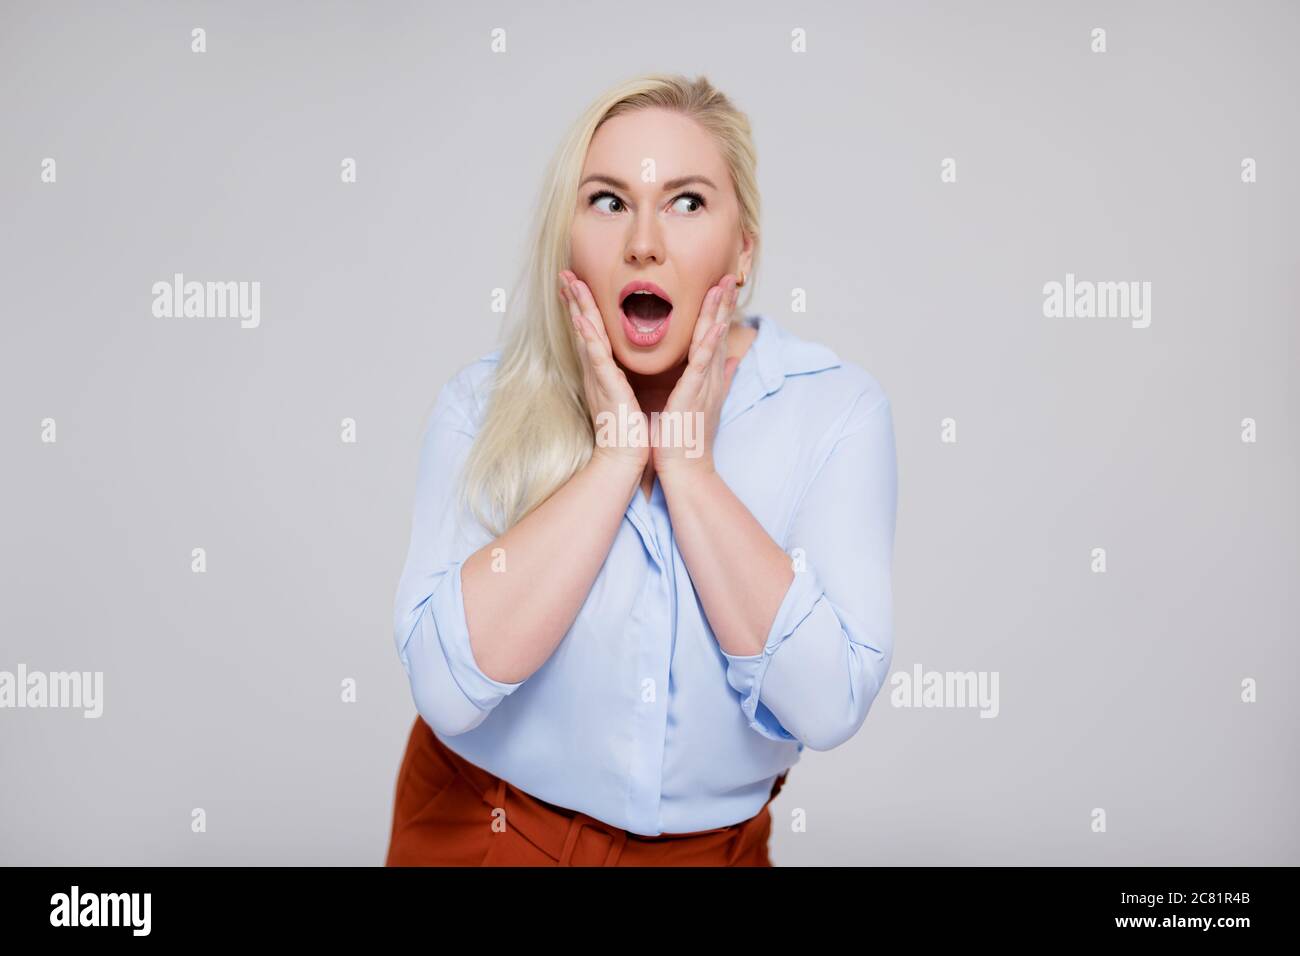 portrait of surprised beautiful plus size blonde woman over gray background with copy space Stock Photo